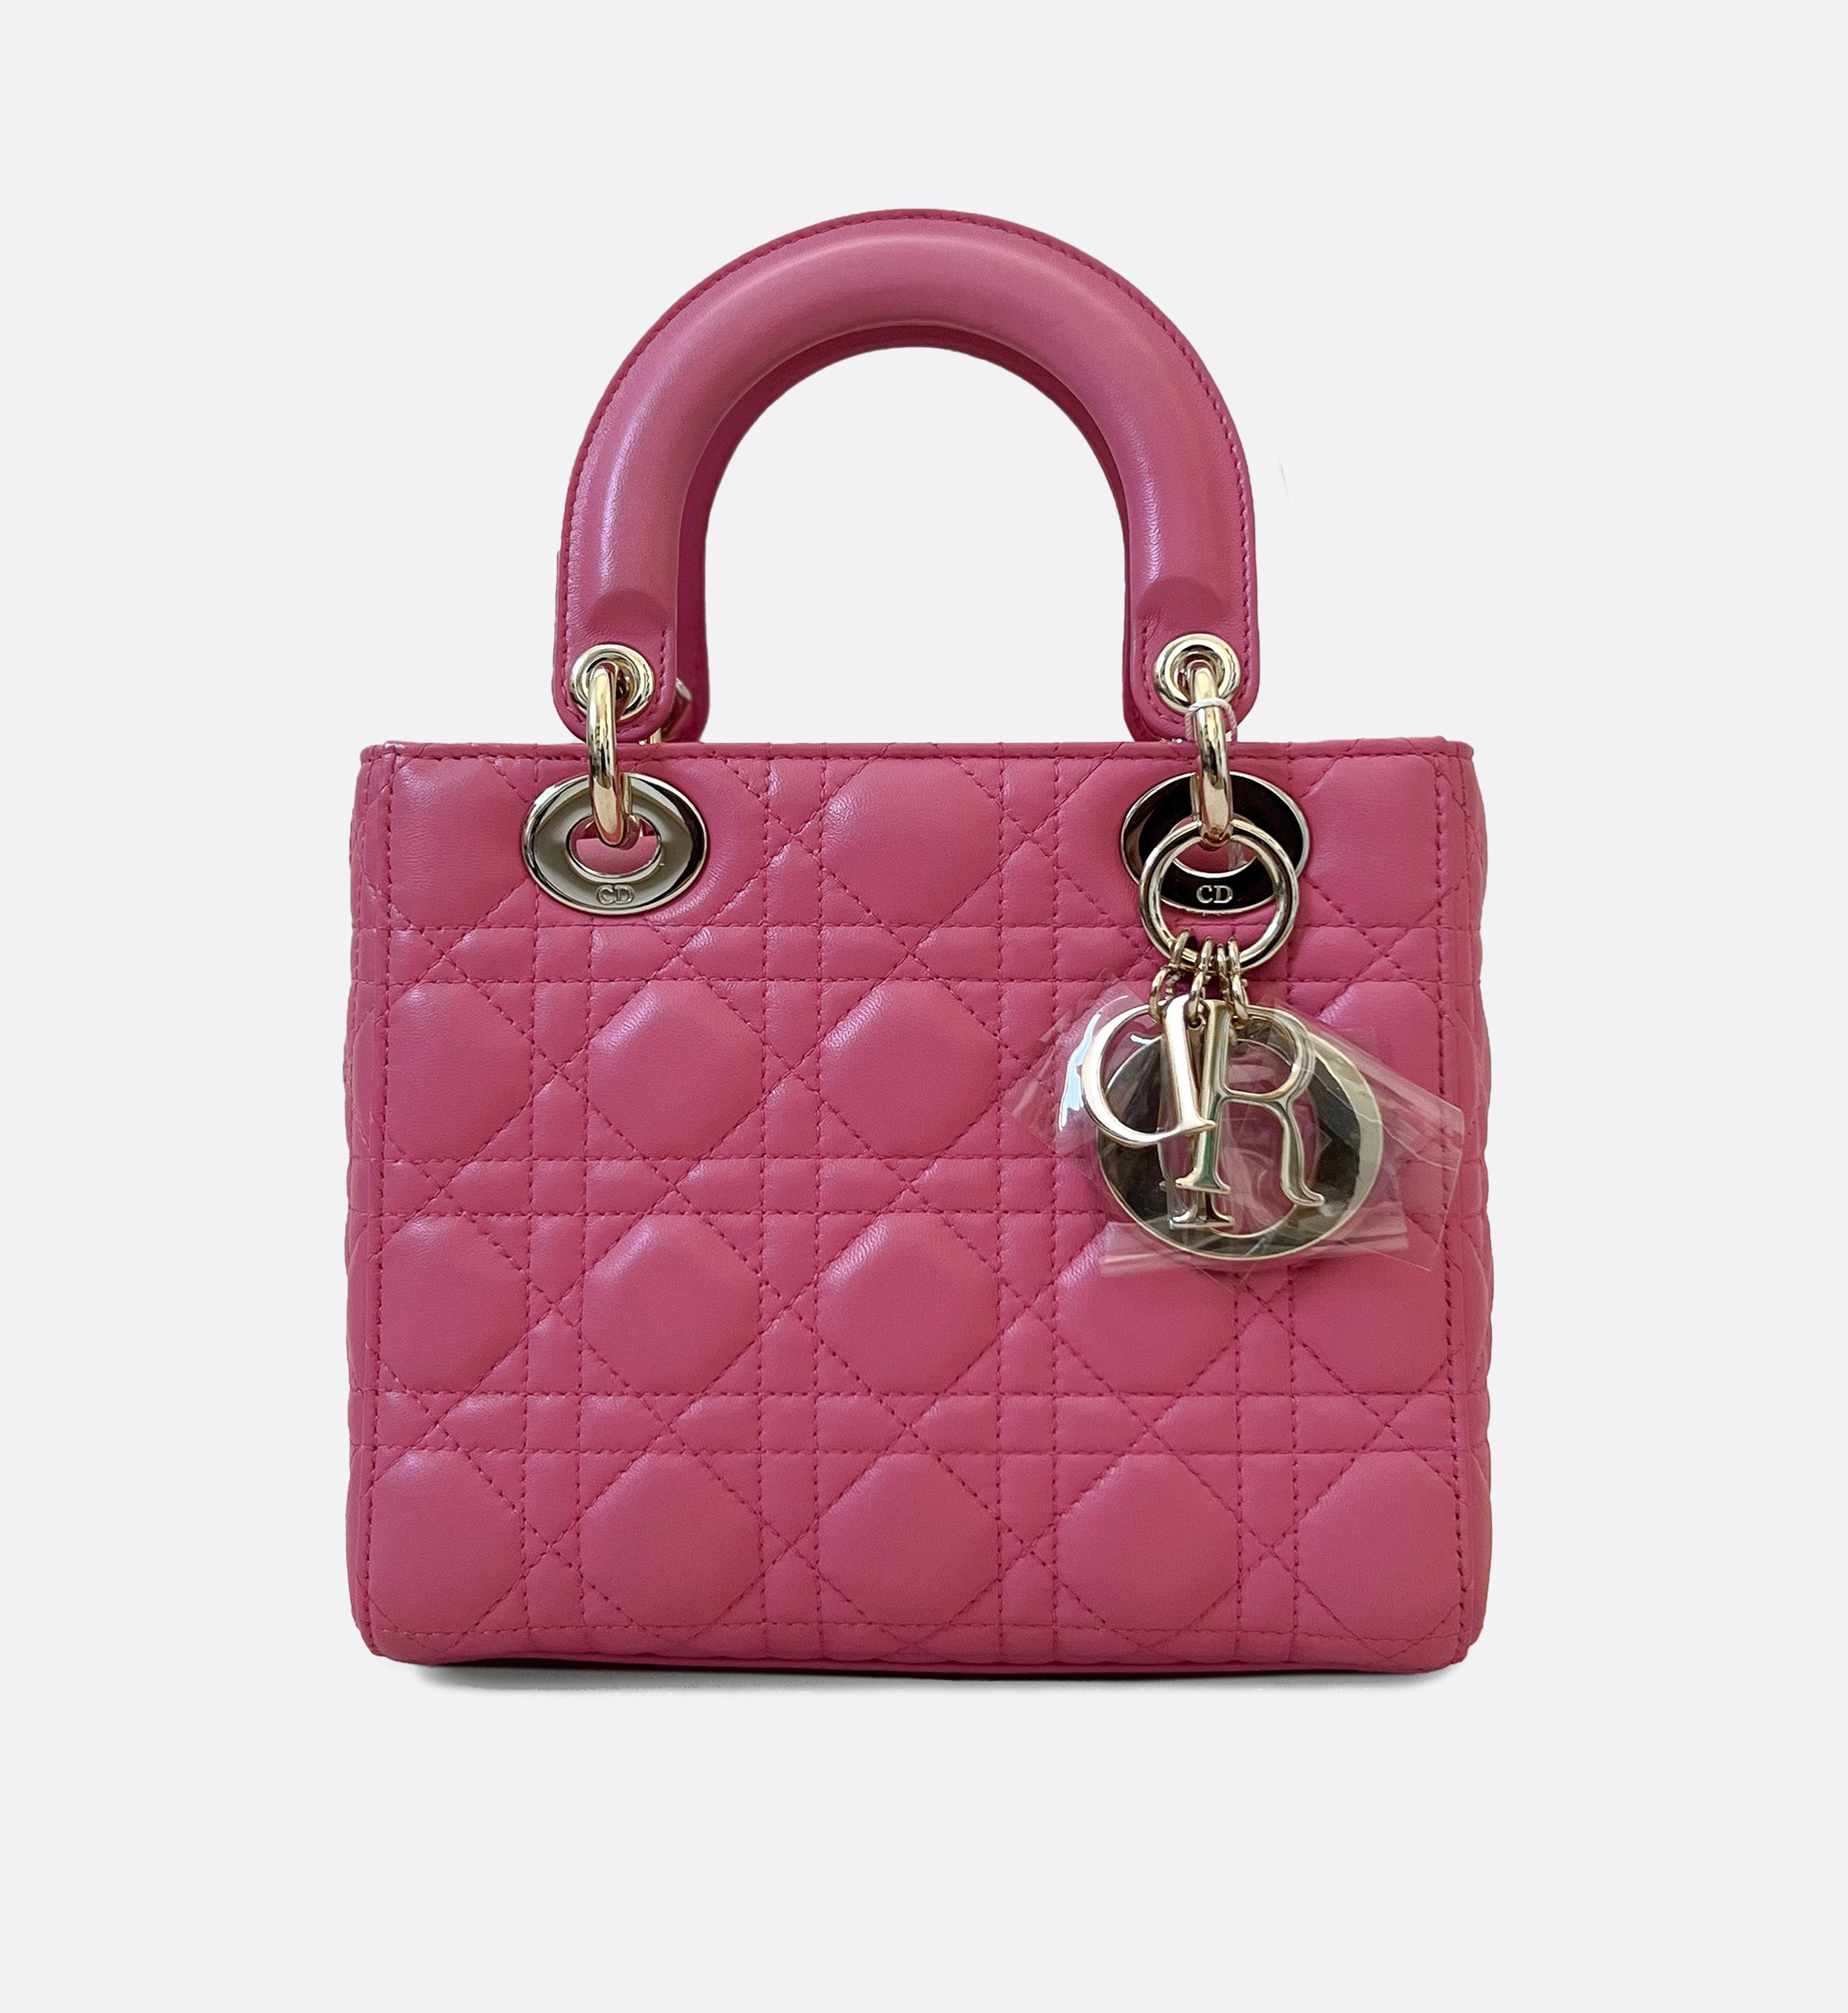 Lady Dior Small in Pink Lambskin with GHW